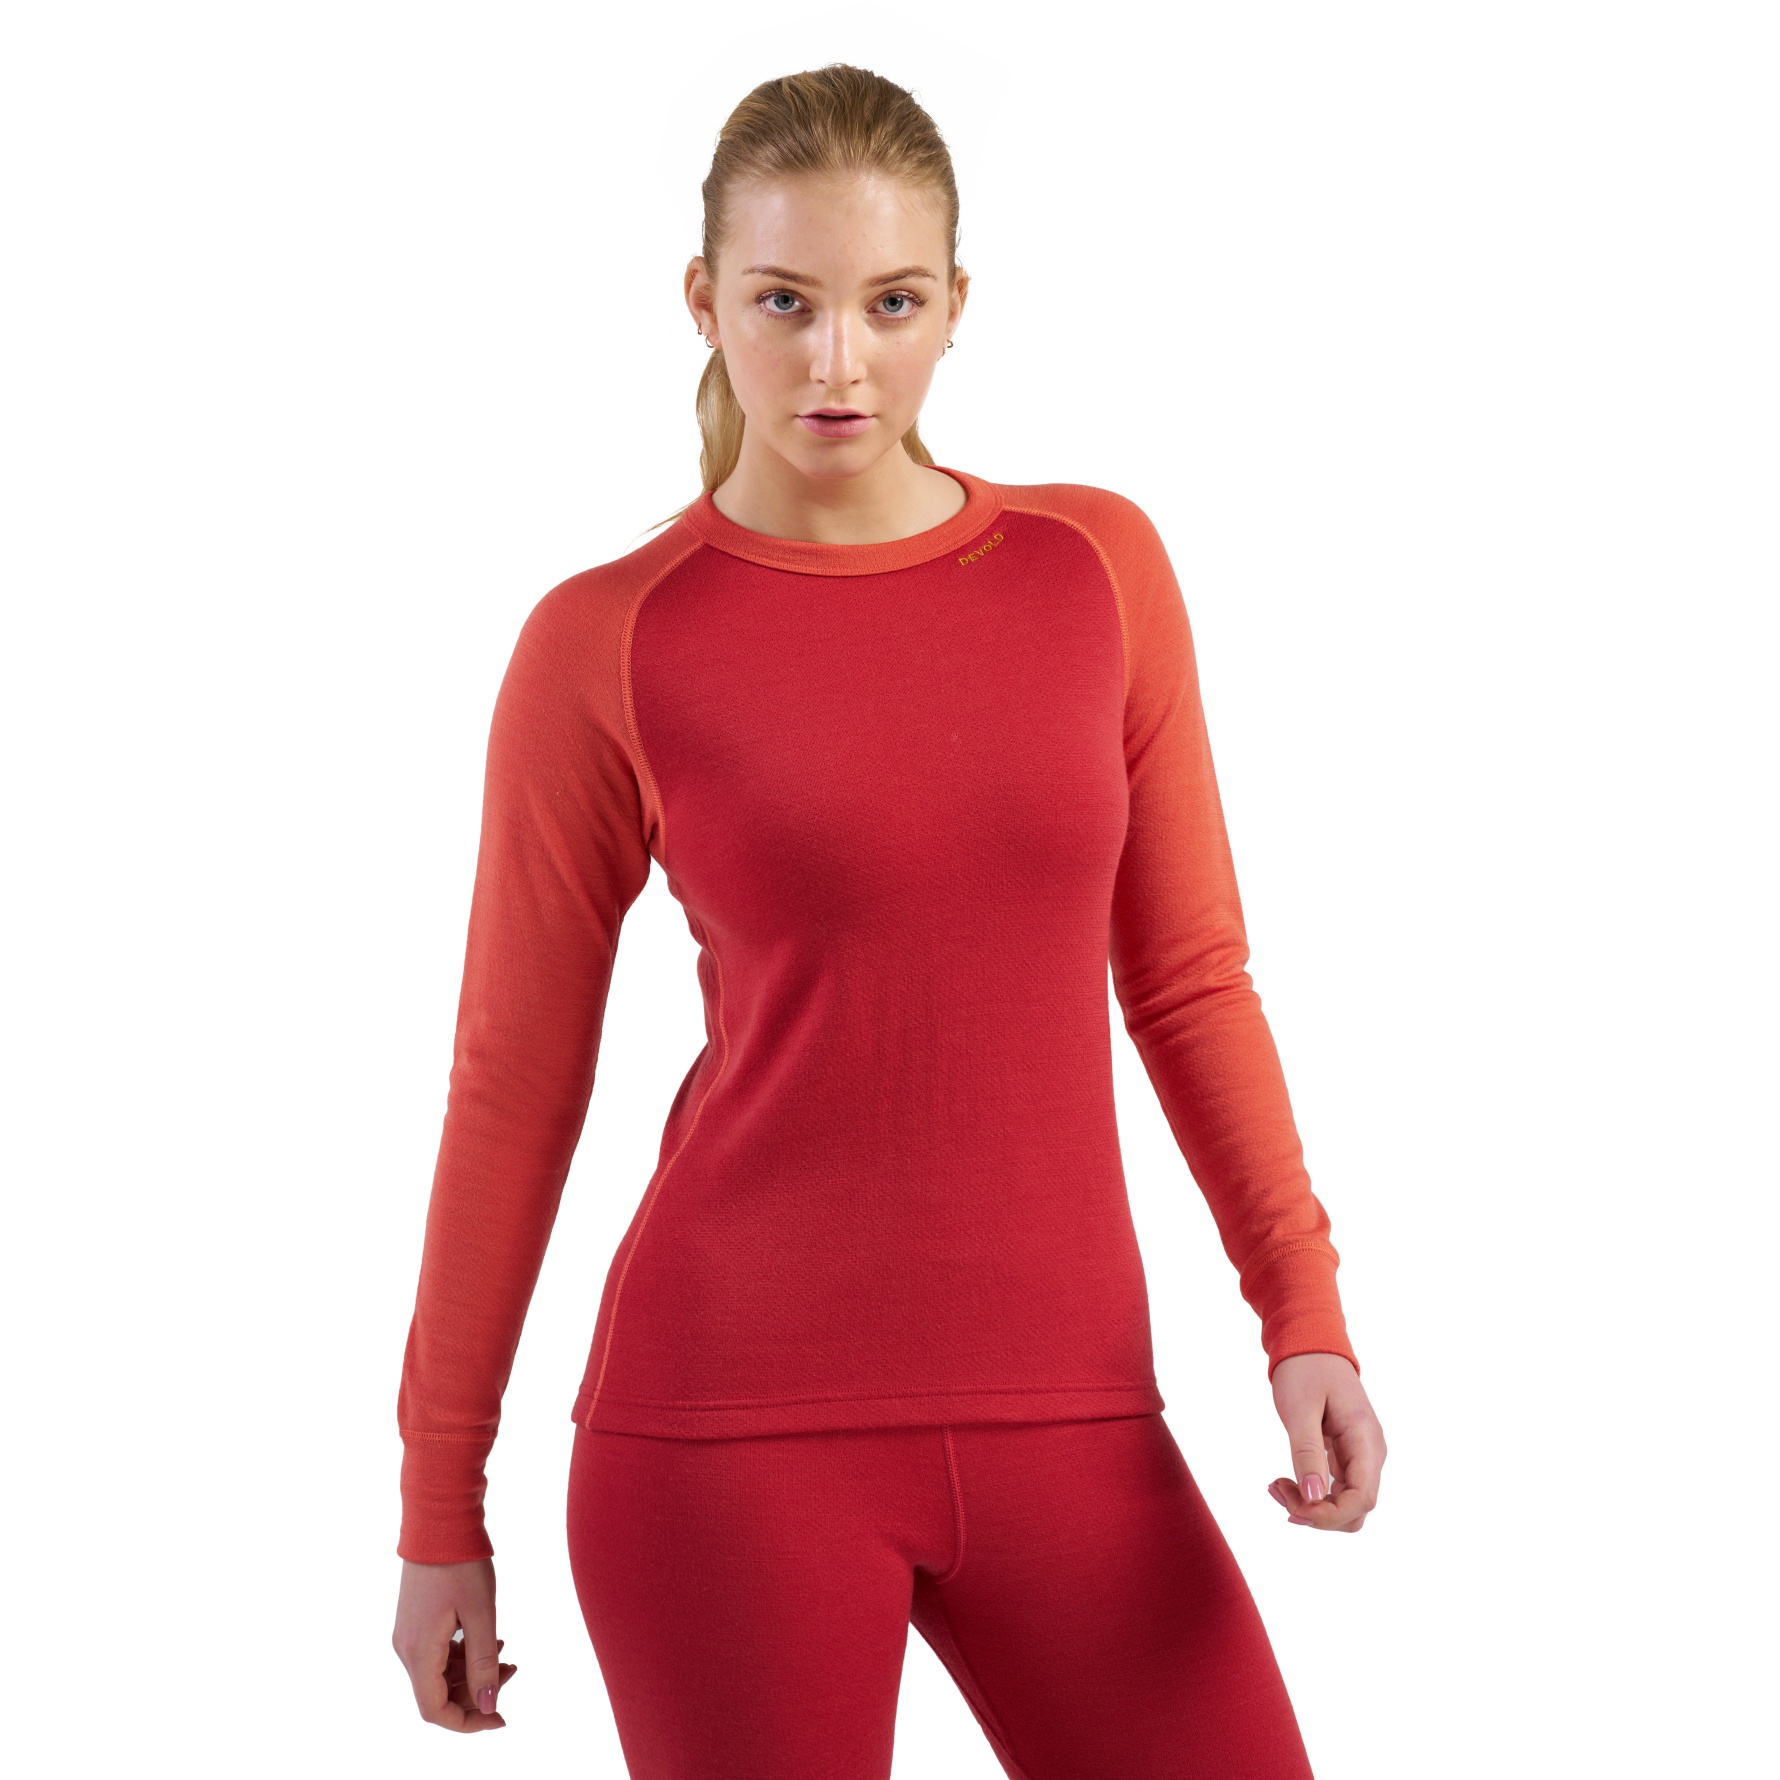 Picture of Devold Expedition Merino 235 Shirt Women - 164 Beauty/Coral